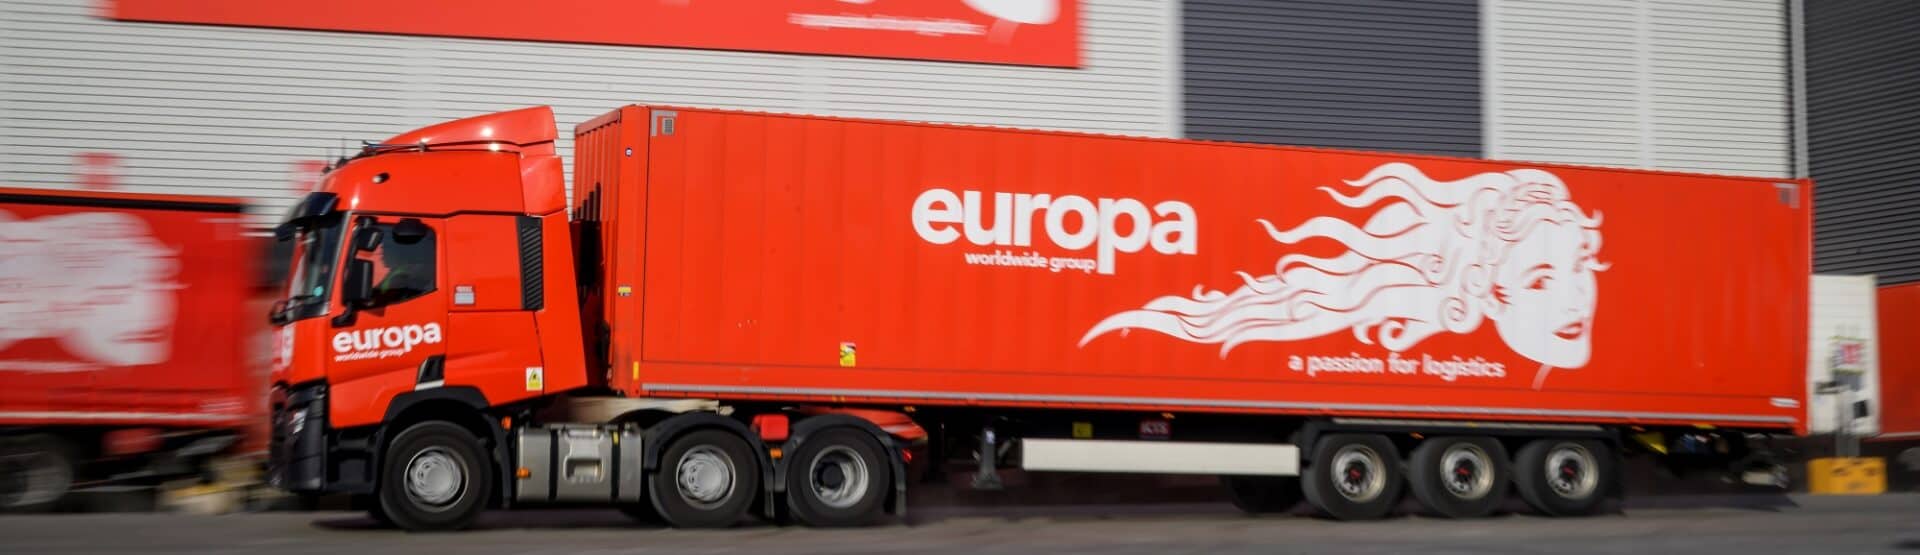 Image showing a Europa Worldwide truck outside a logistics site